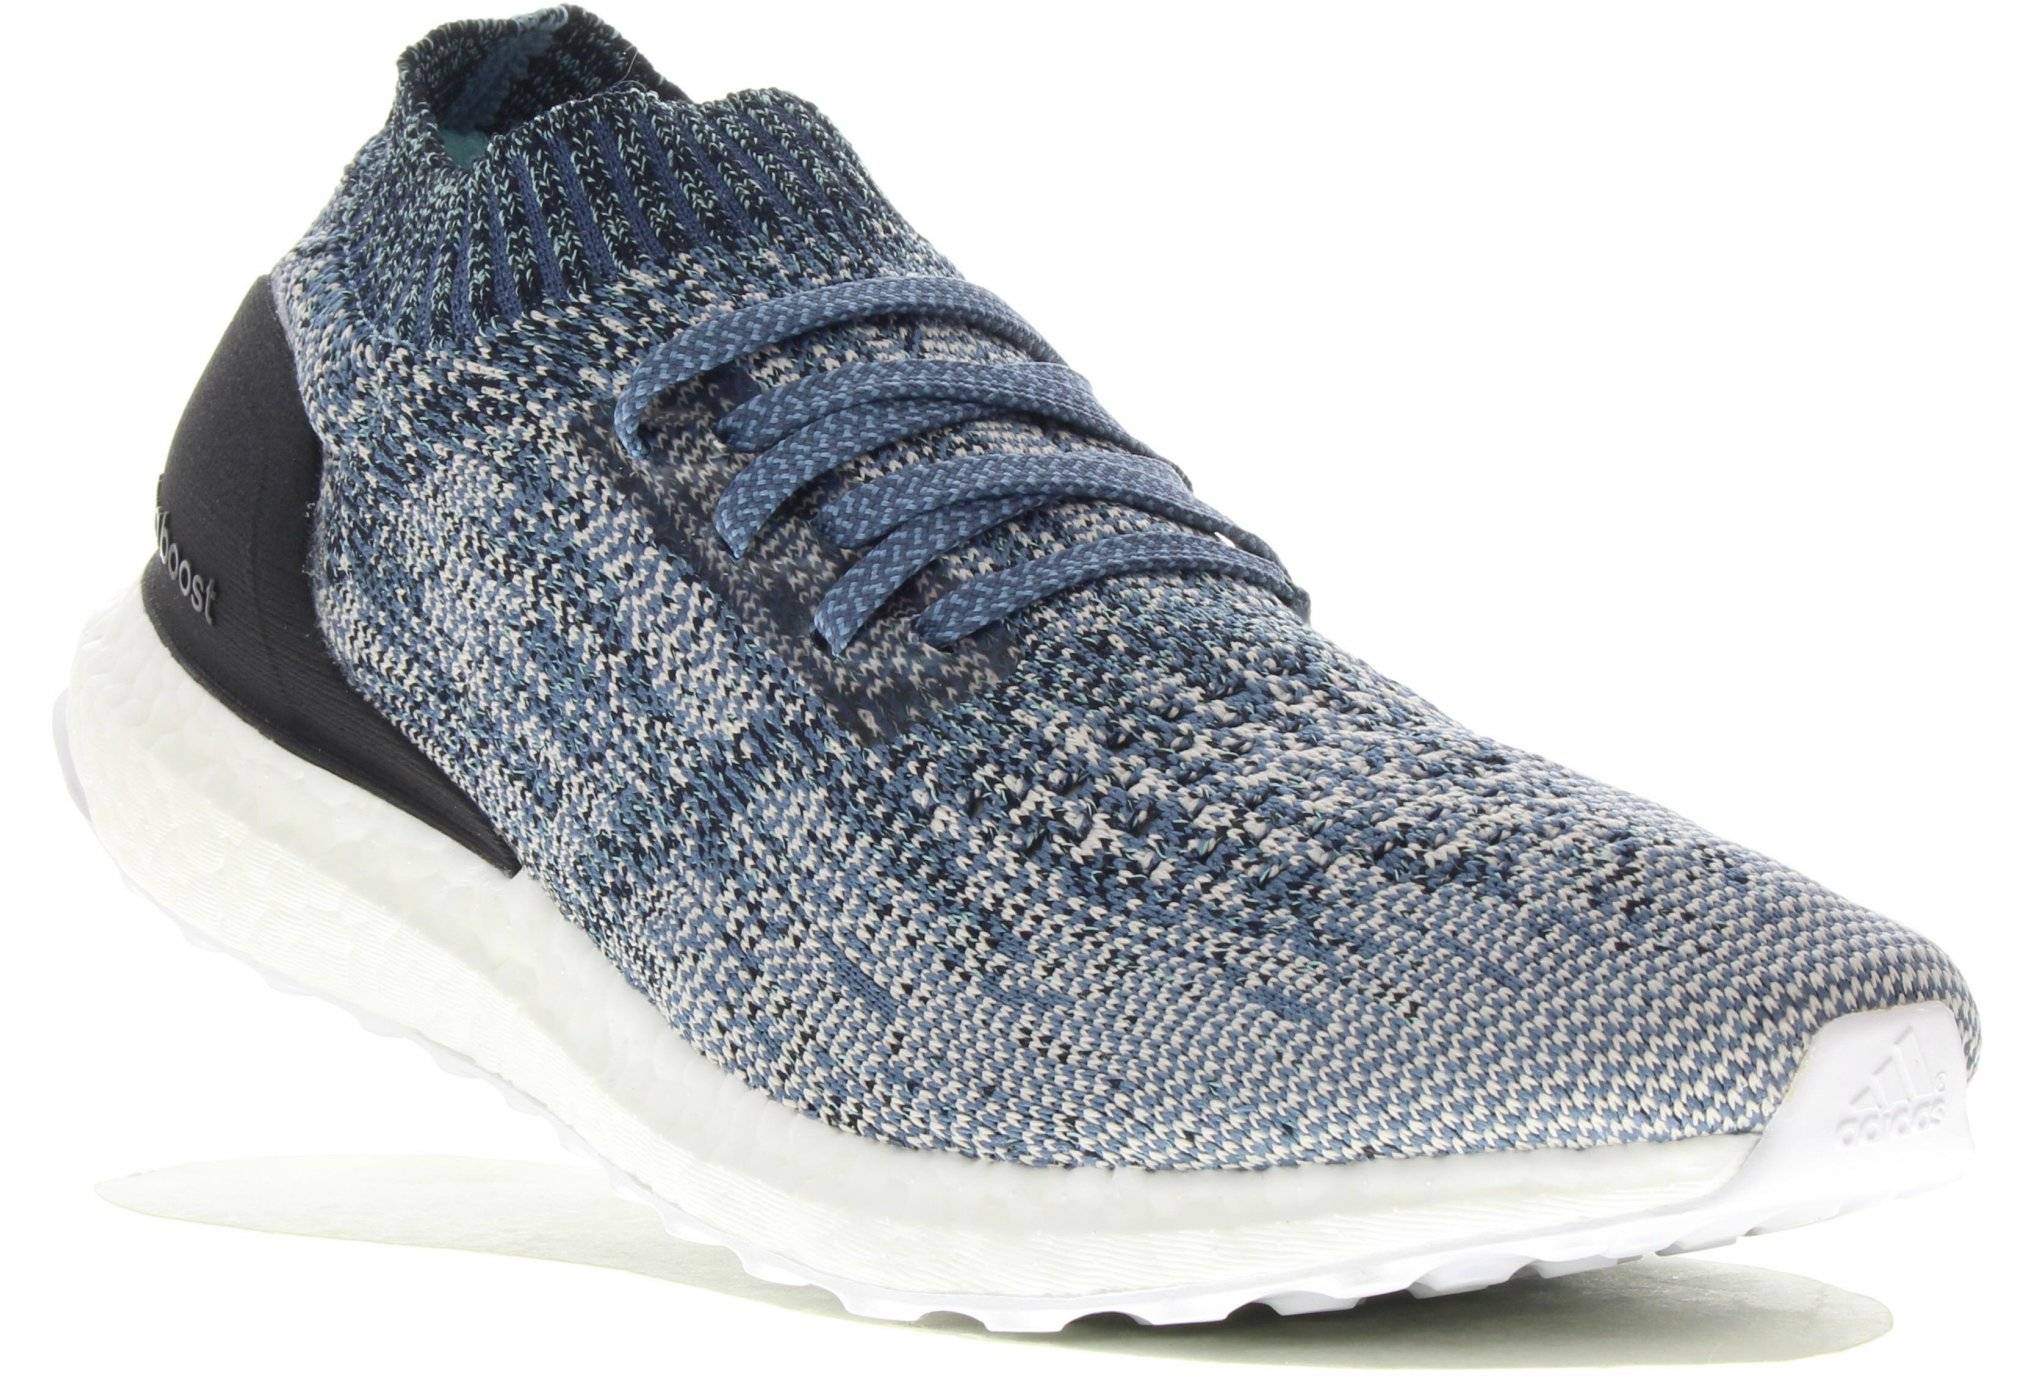 adidas UltraBOOST Uncaged Parley M 